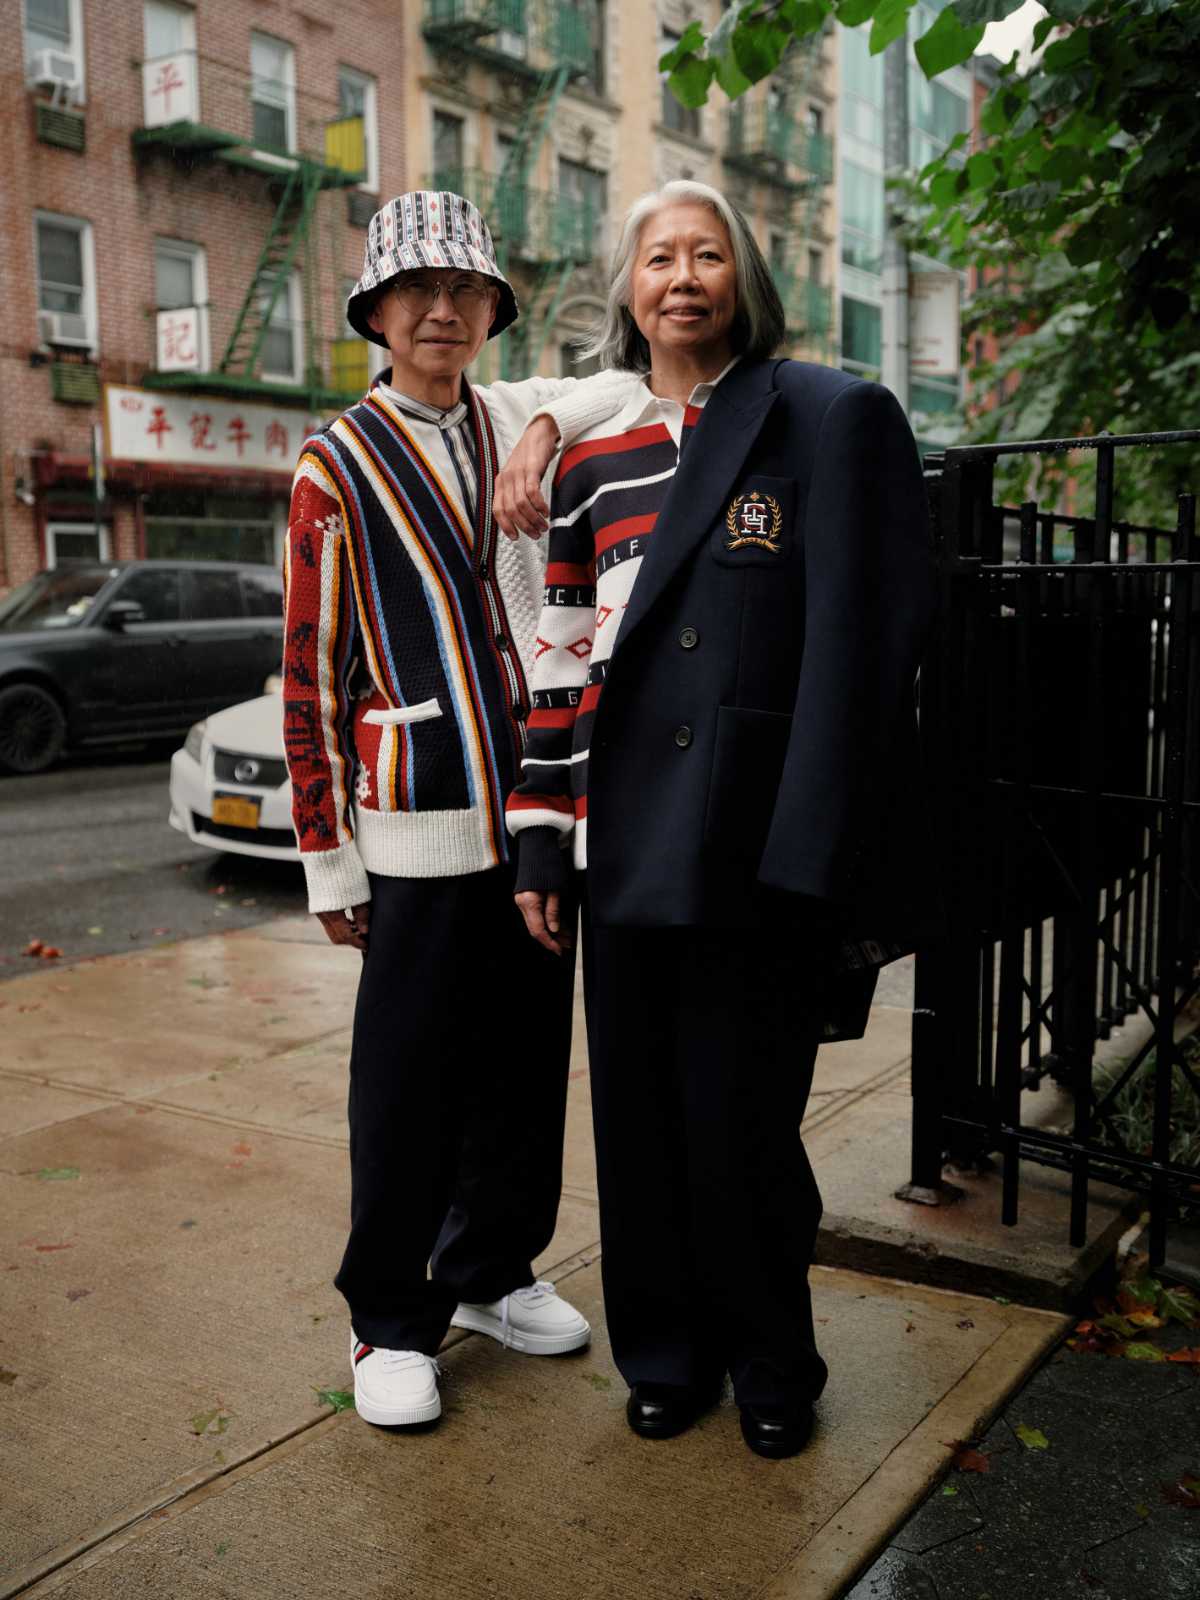 Tommy Hilfiger Brings Together Fashion & Music Royalty for Fall